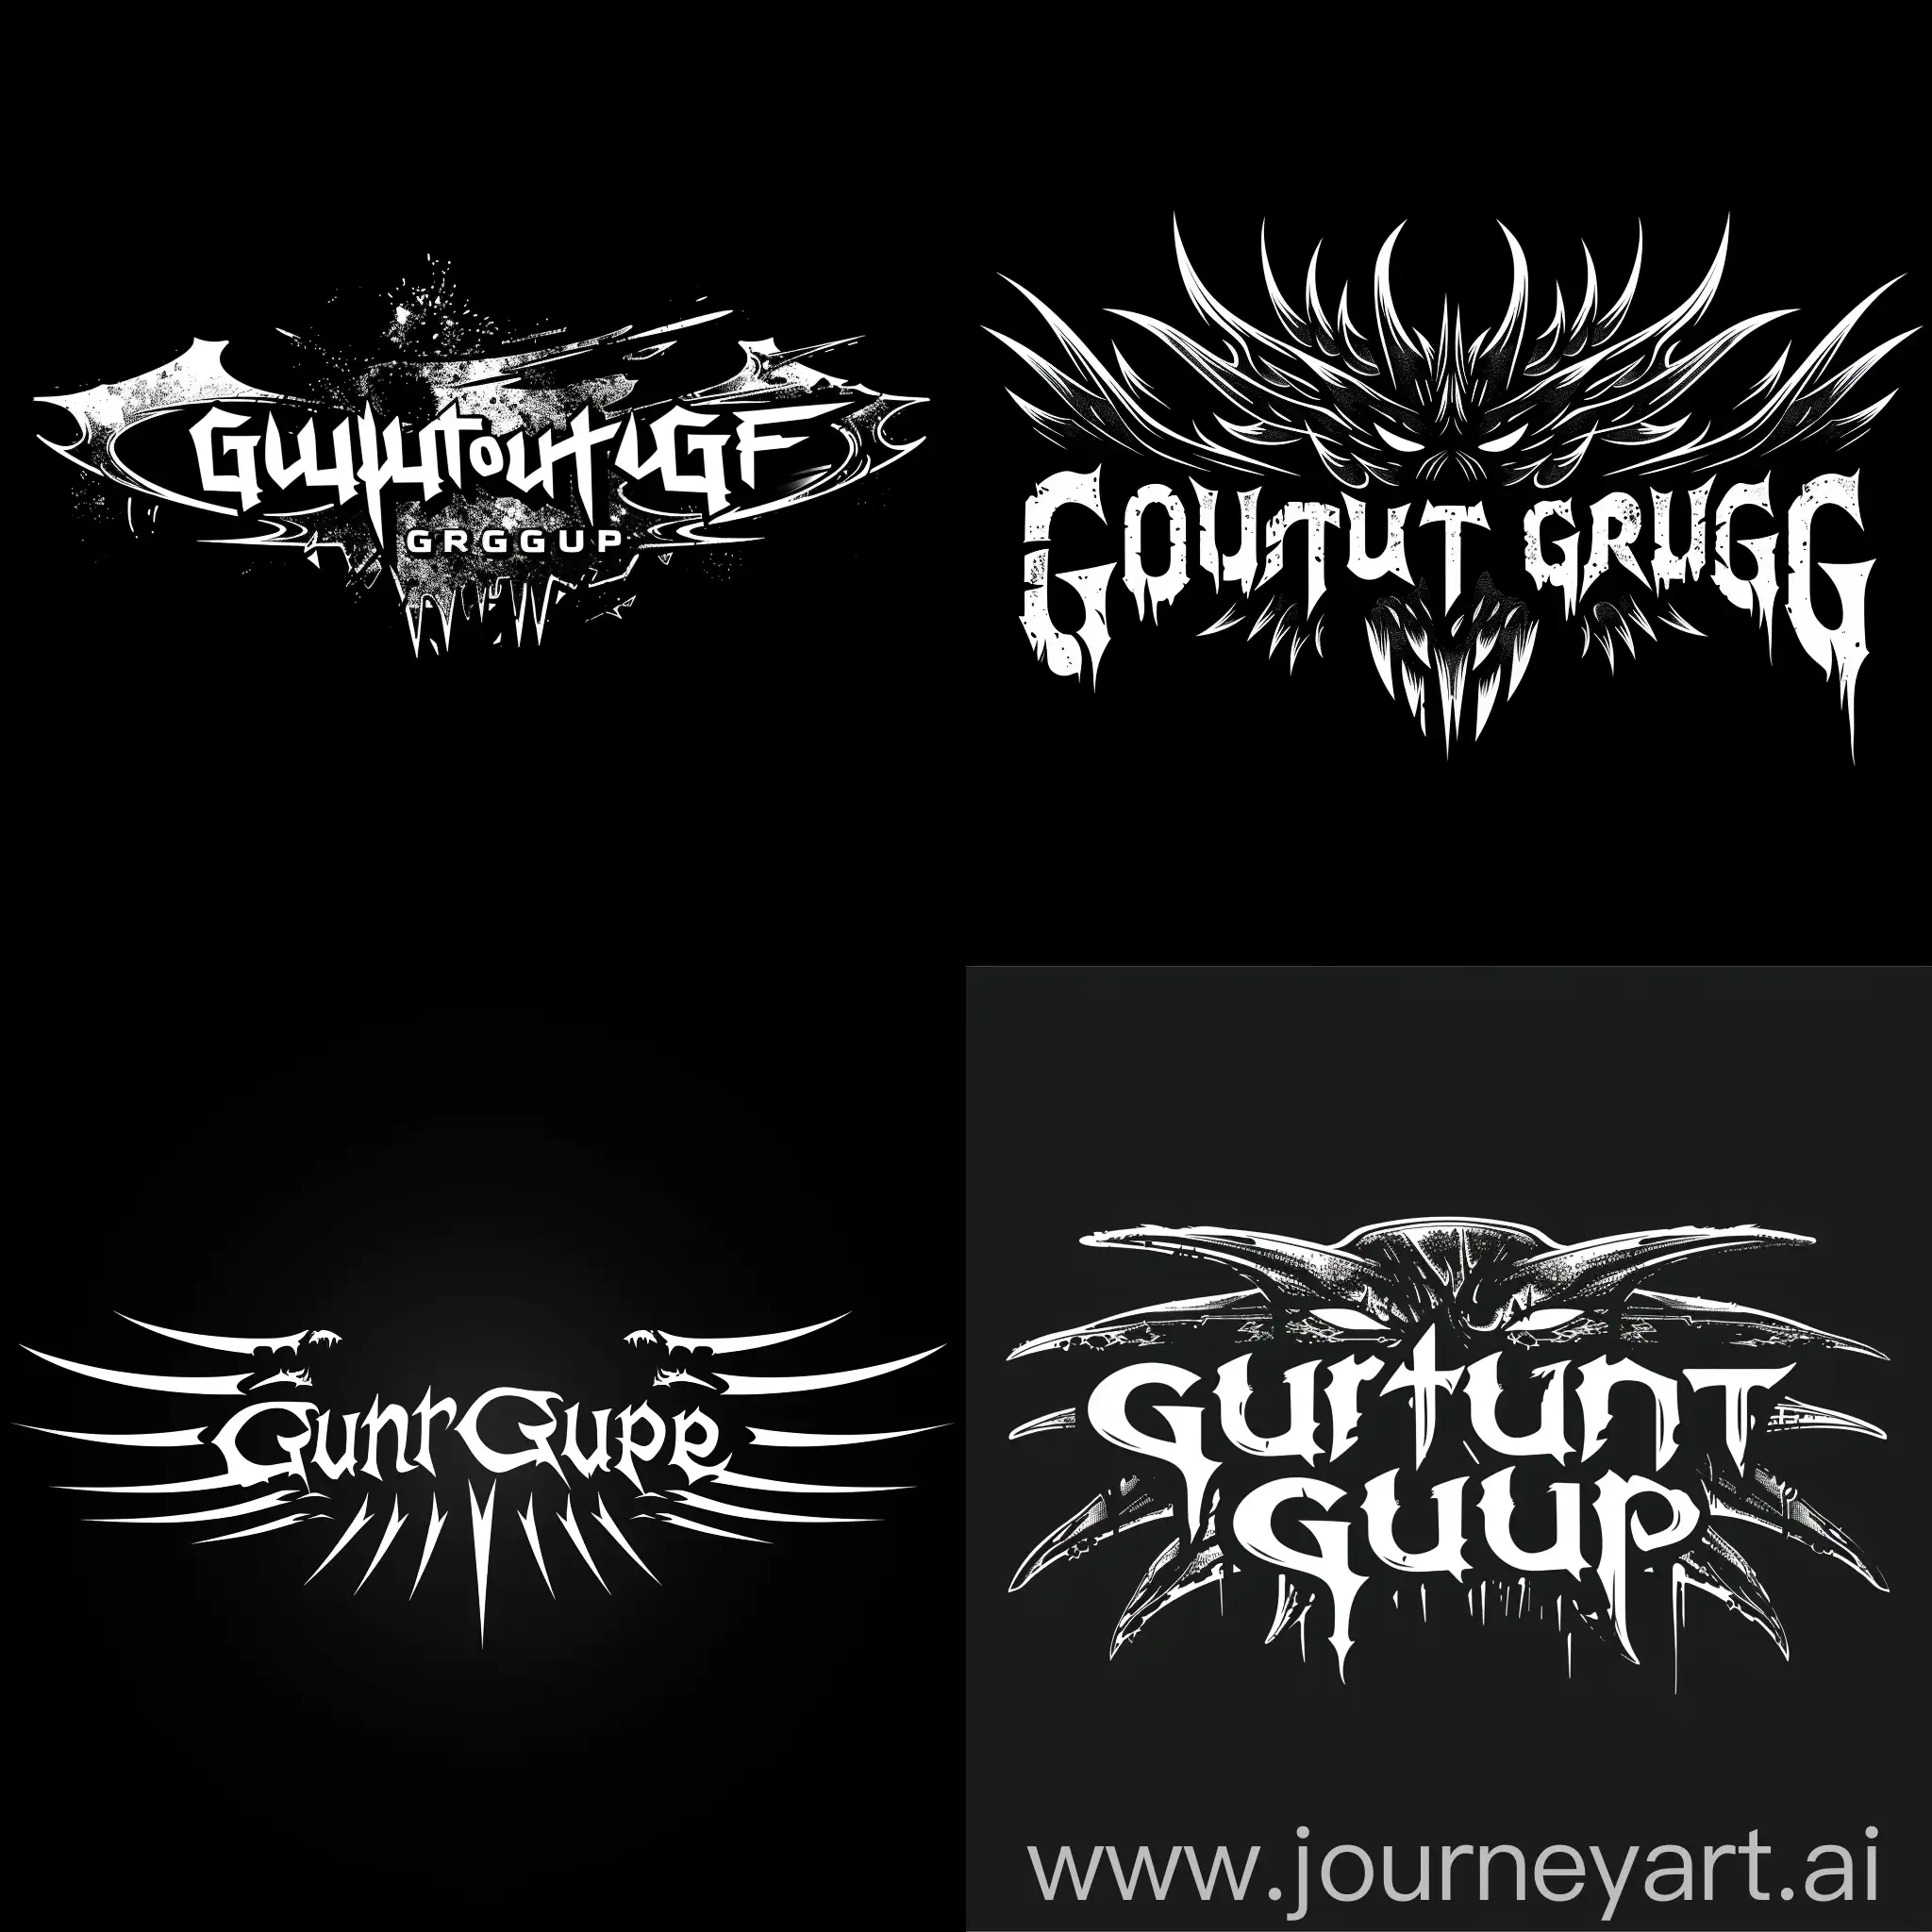 create a dark heavy metal logo, saying gutter group, in white text on a black background